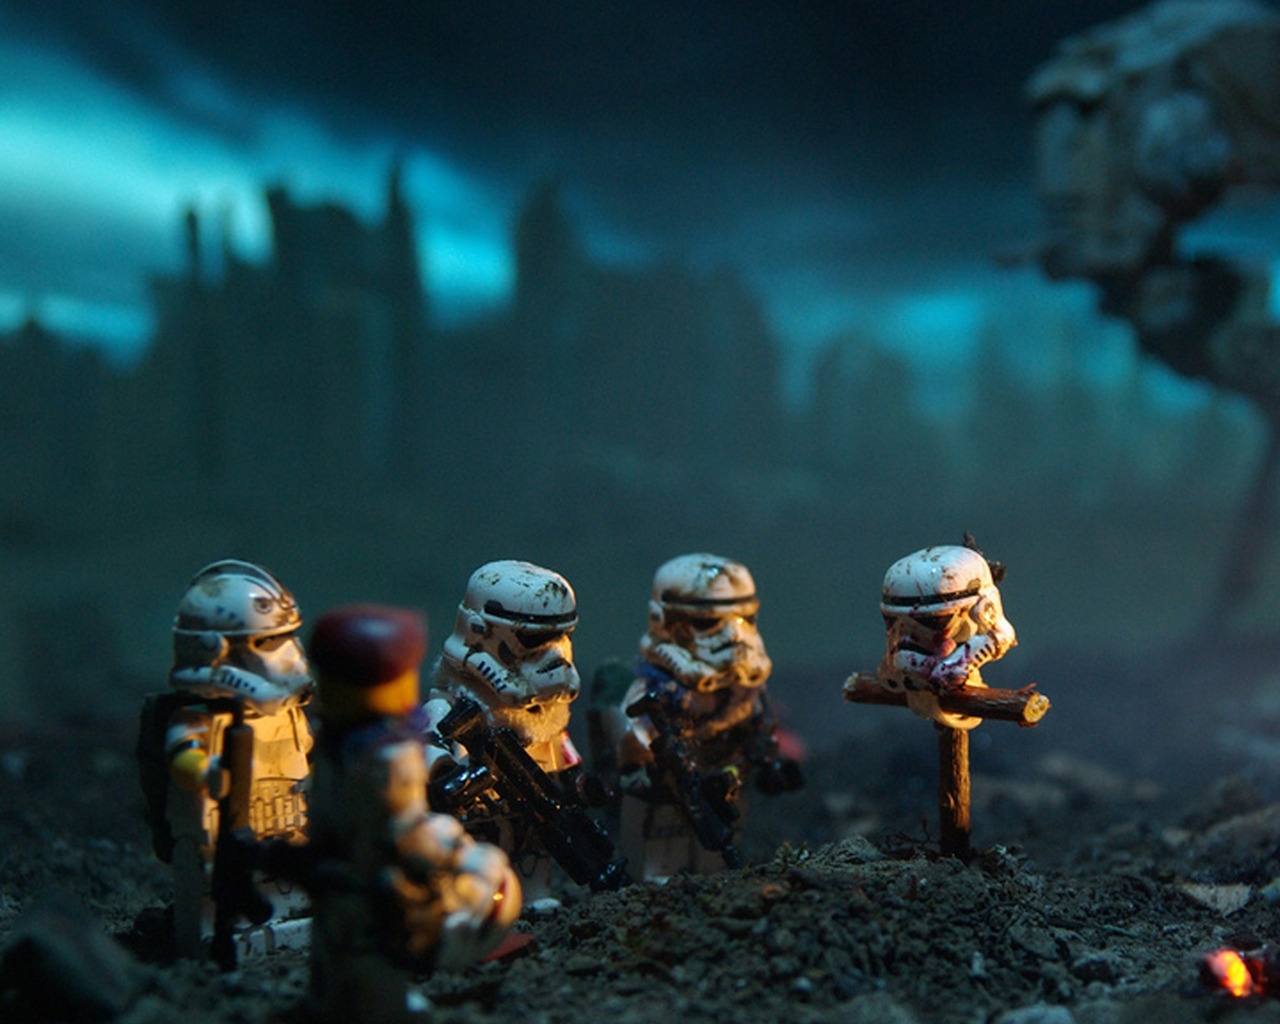 Star Wars Lego Soldiers for 1280 x 1024 resolution